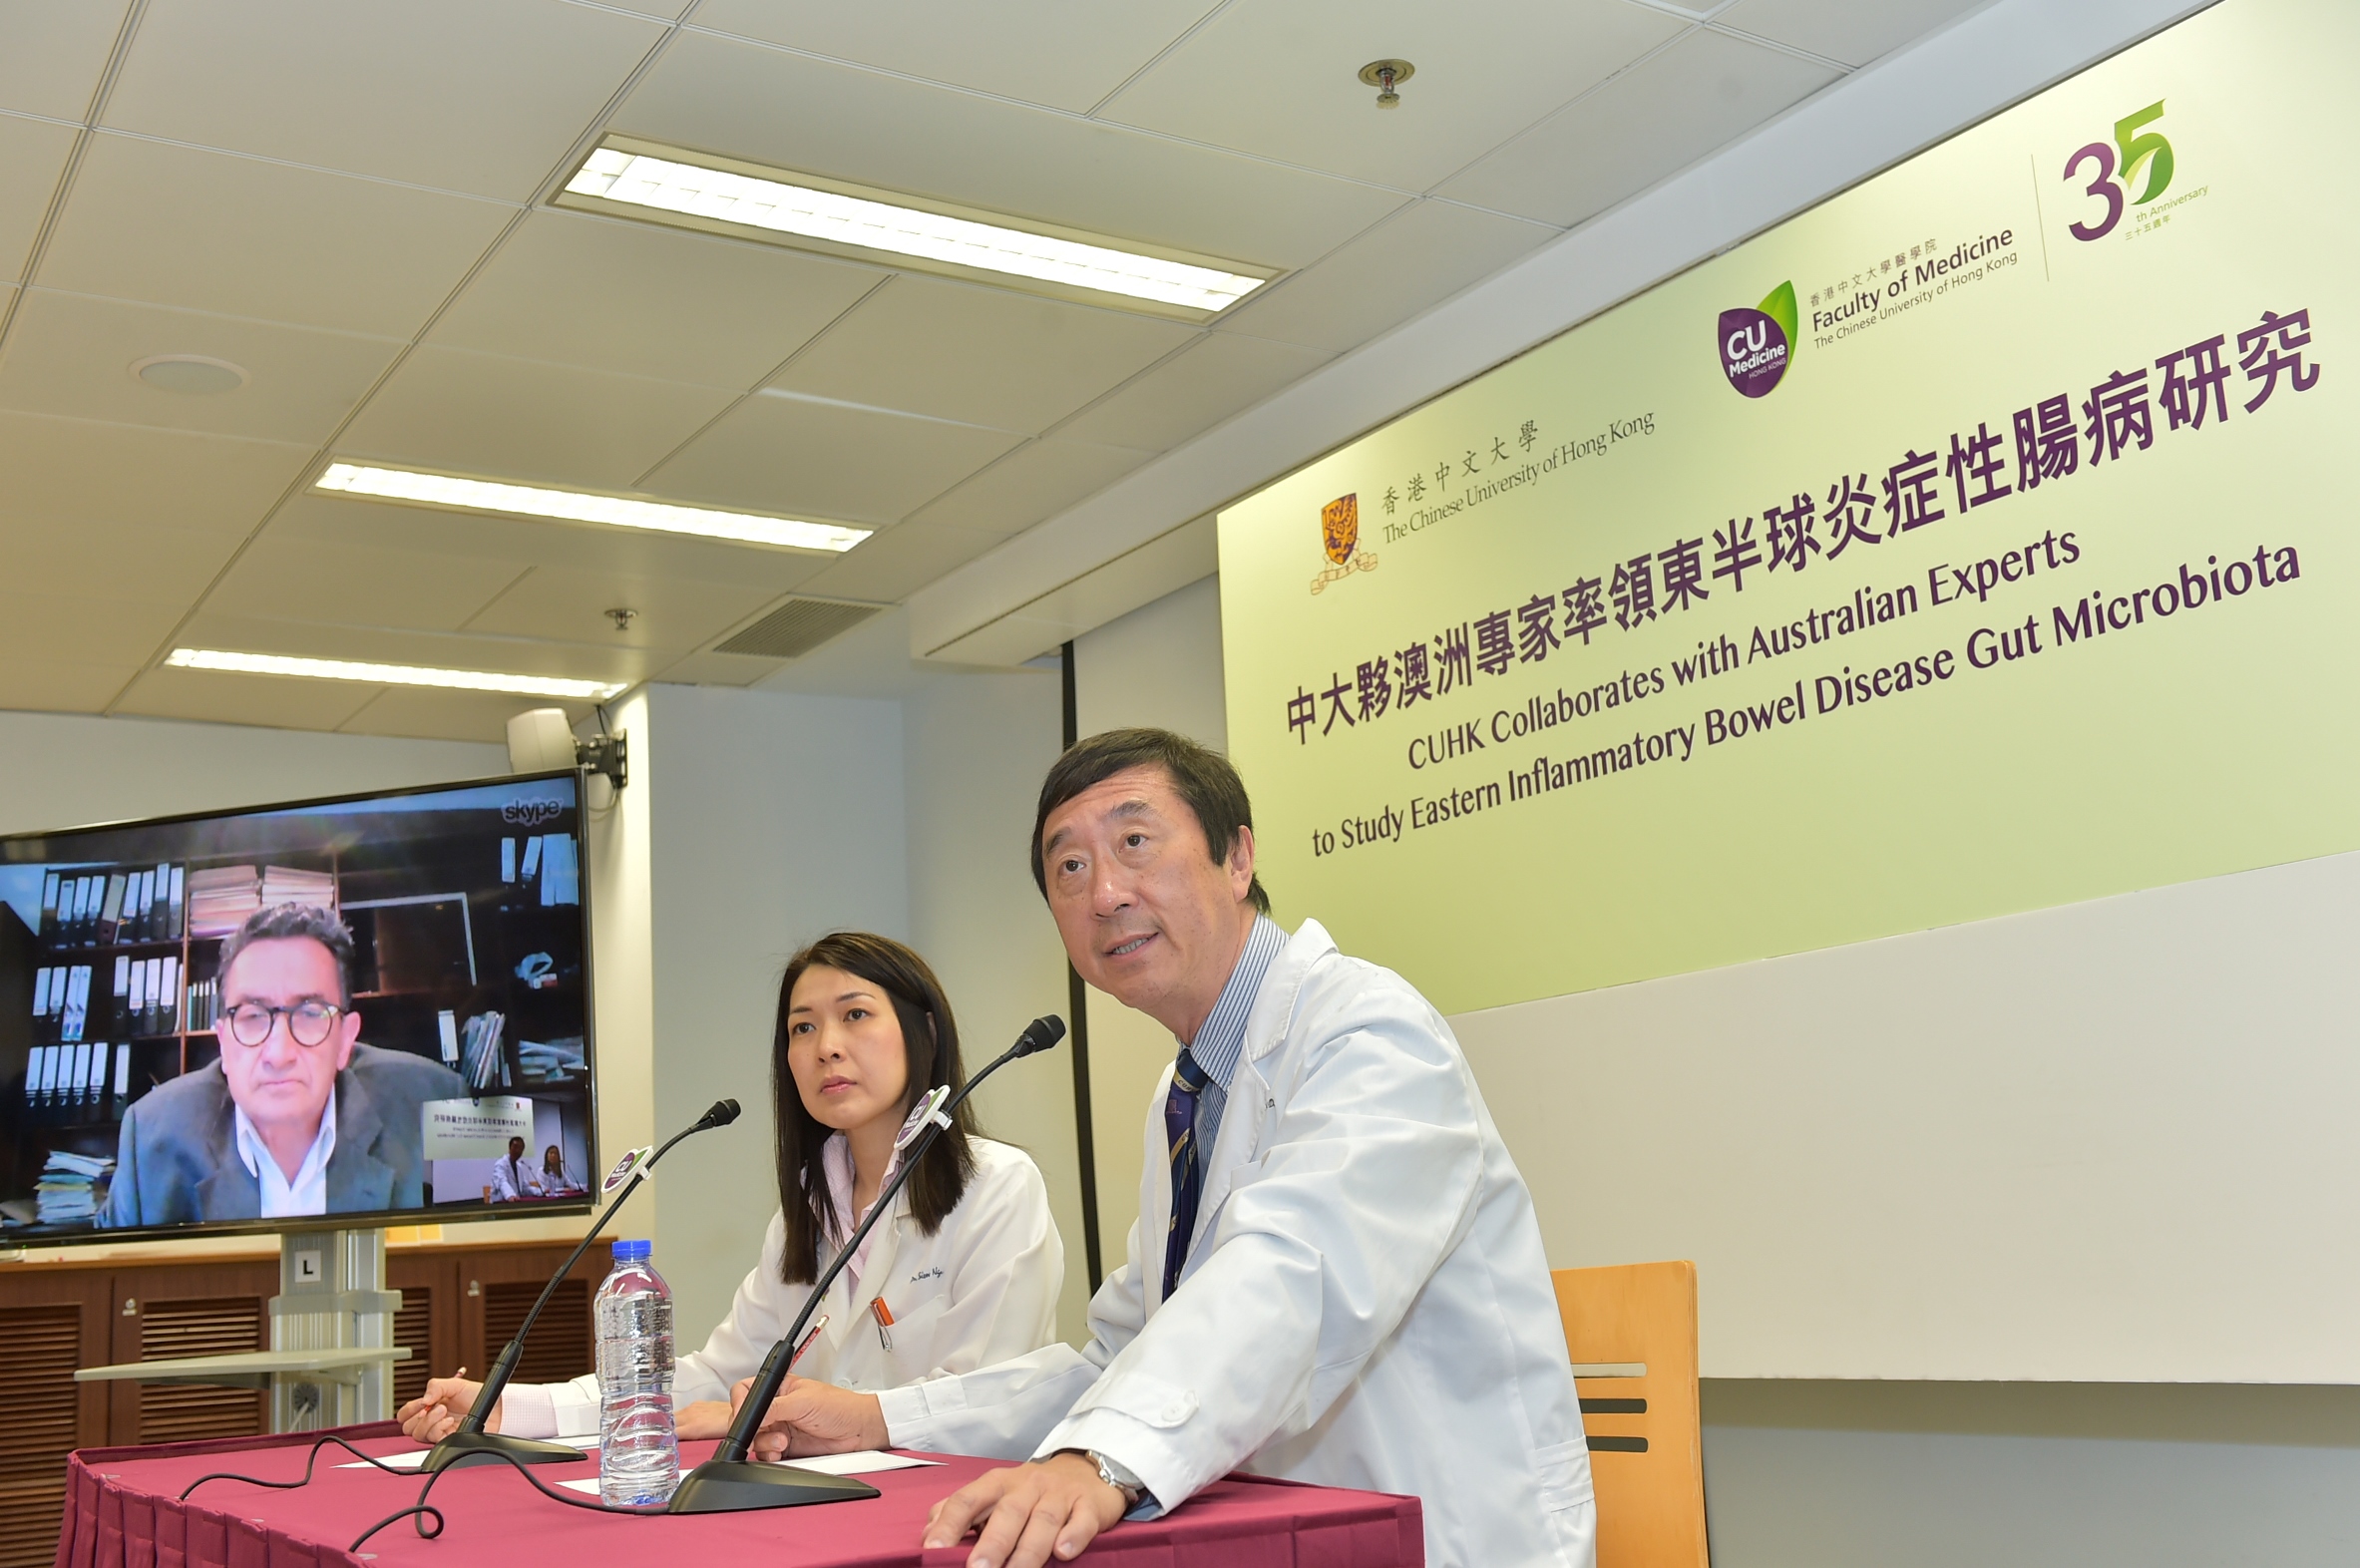  Prof. Joseph J.Y. SUNG, Vice-Chancellor and President and Mok Hing Yiu Professor of Medicine of CUHK (right) and Prof. Siew Chien NG, Department of Medicine and Therapeutics, Faculty of Medicine at CUHK (centre), discuss the incidence of Crohn’s disease in both Hong Kong and Australia with Prof. Michael KAMM, Professor of Gastroenterology from St. Vincent Hospital and the University of Melbourne, via a video call at the press conference.